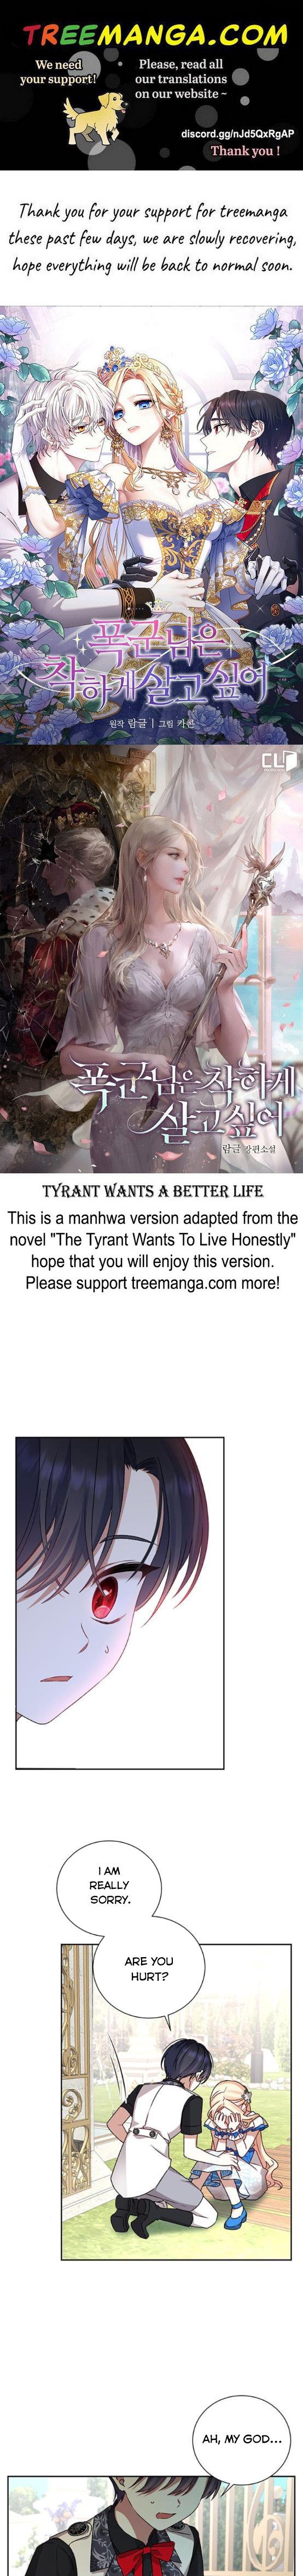 Tyrant wants a better life chapter 3